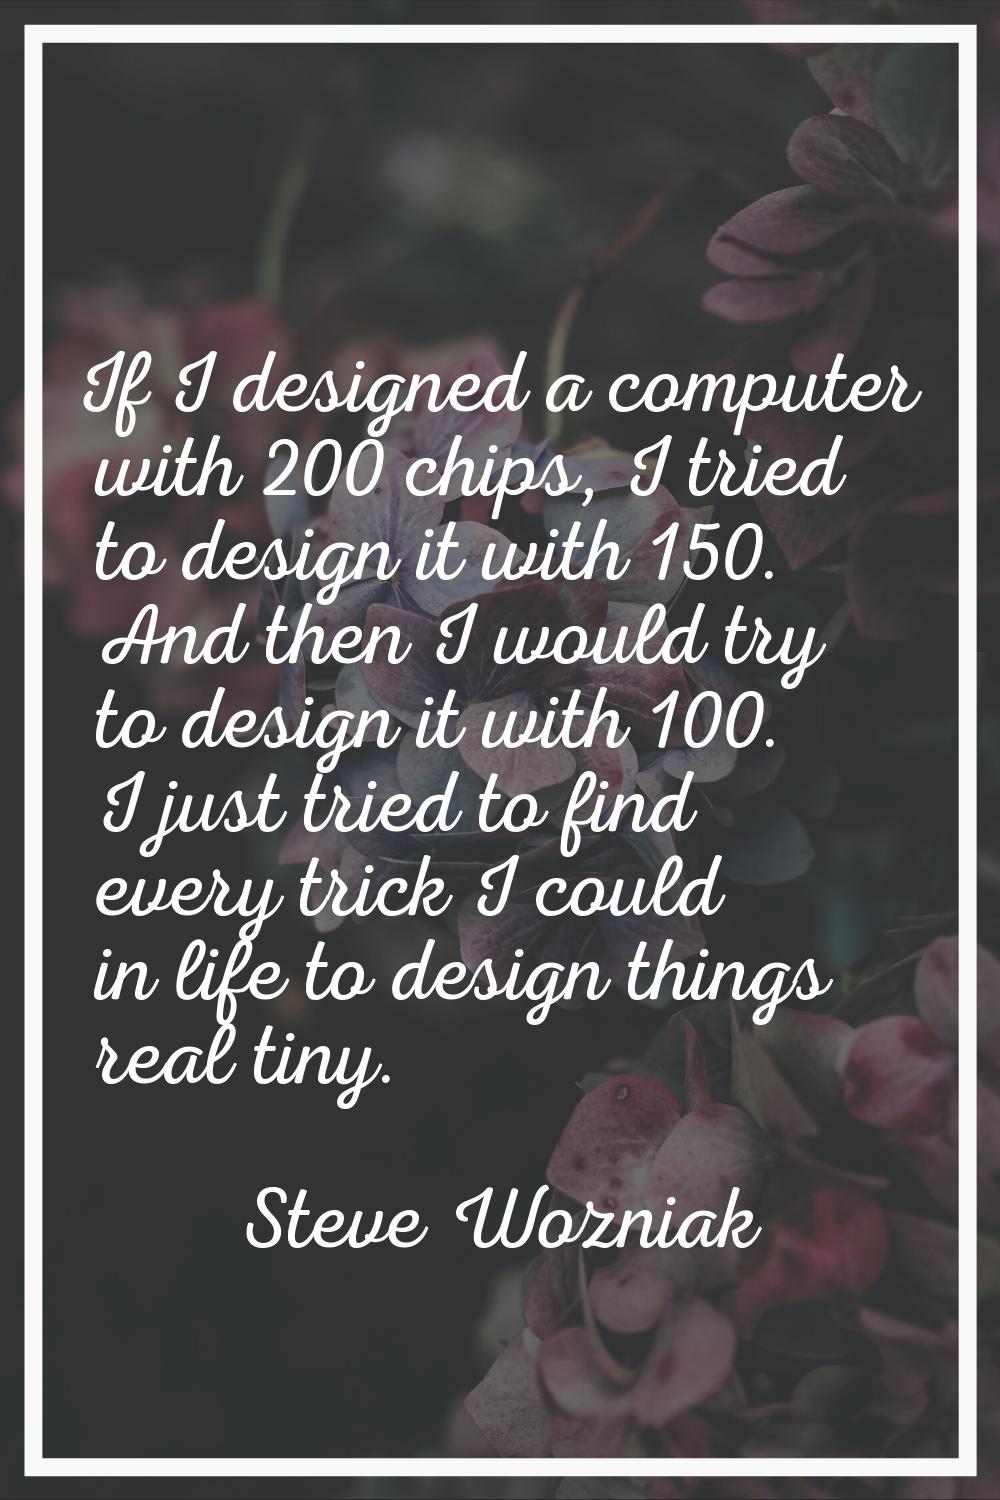 If I designed a computer with 200 chips, I tried to design it with 150. And then I would try to des